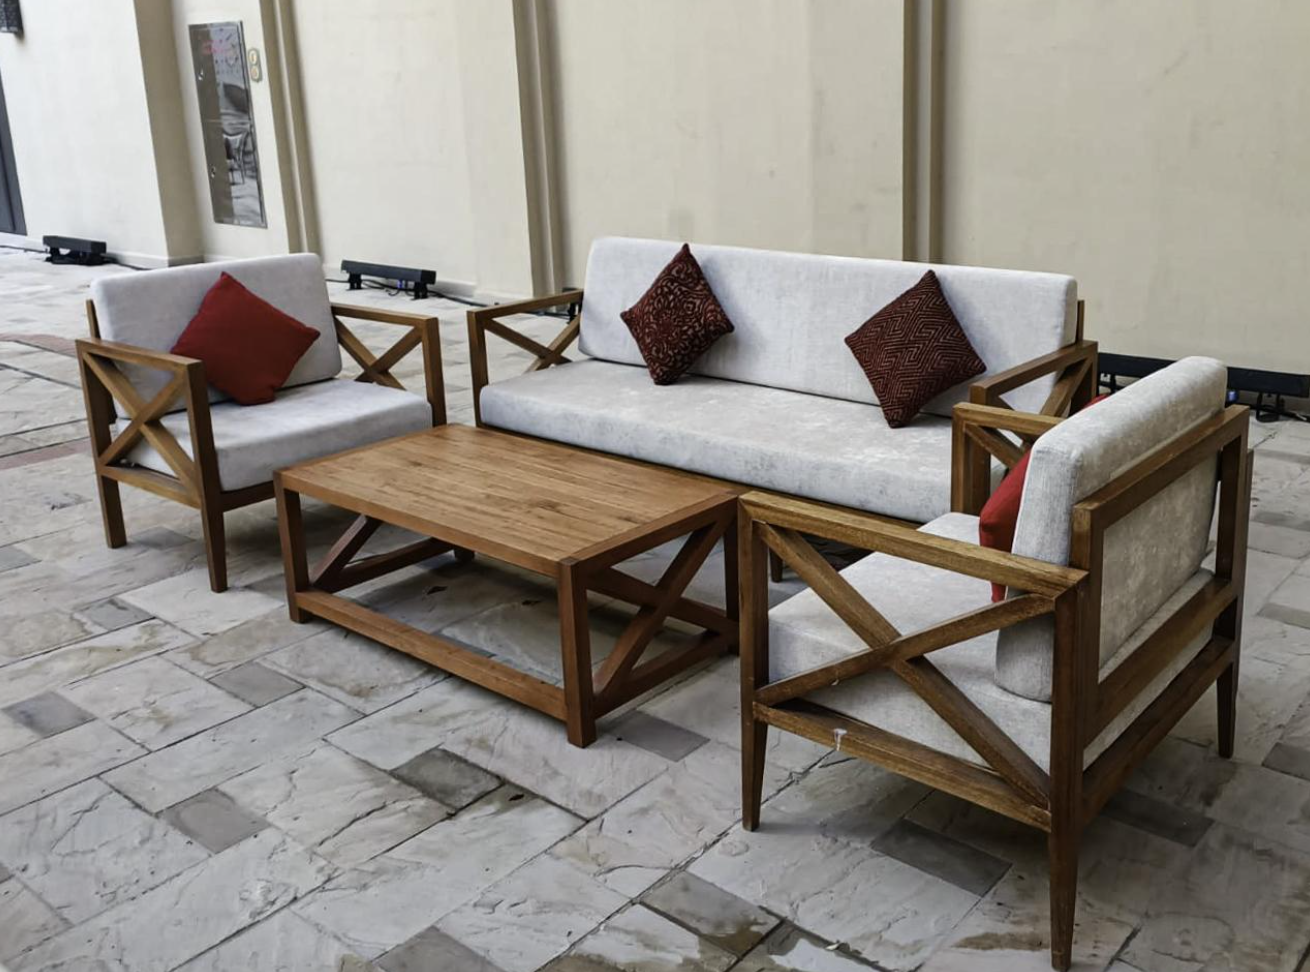 Sustainable Event Furniture: Areeka’s Ecologically Responsible Selections